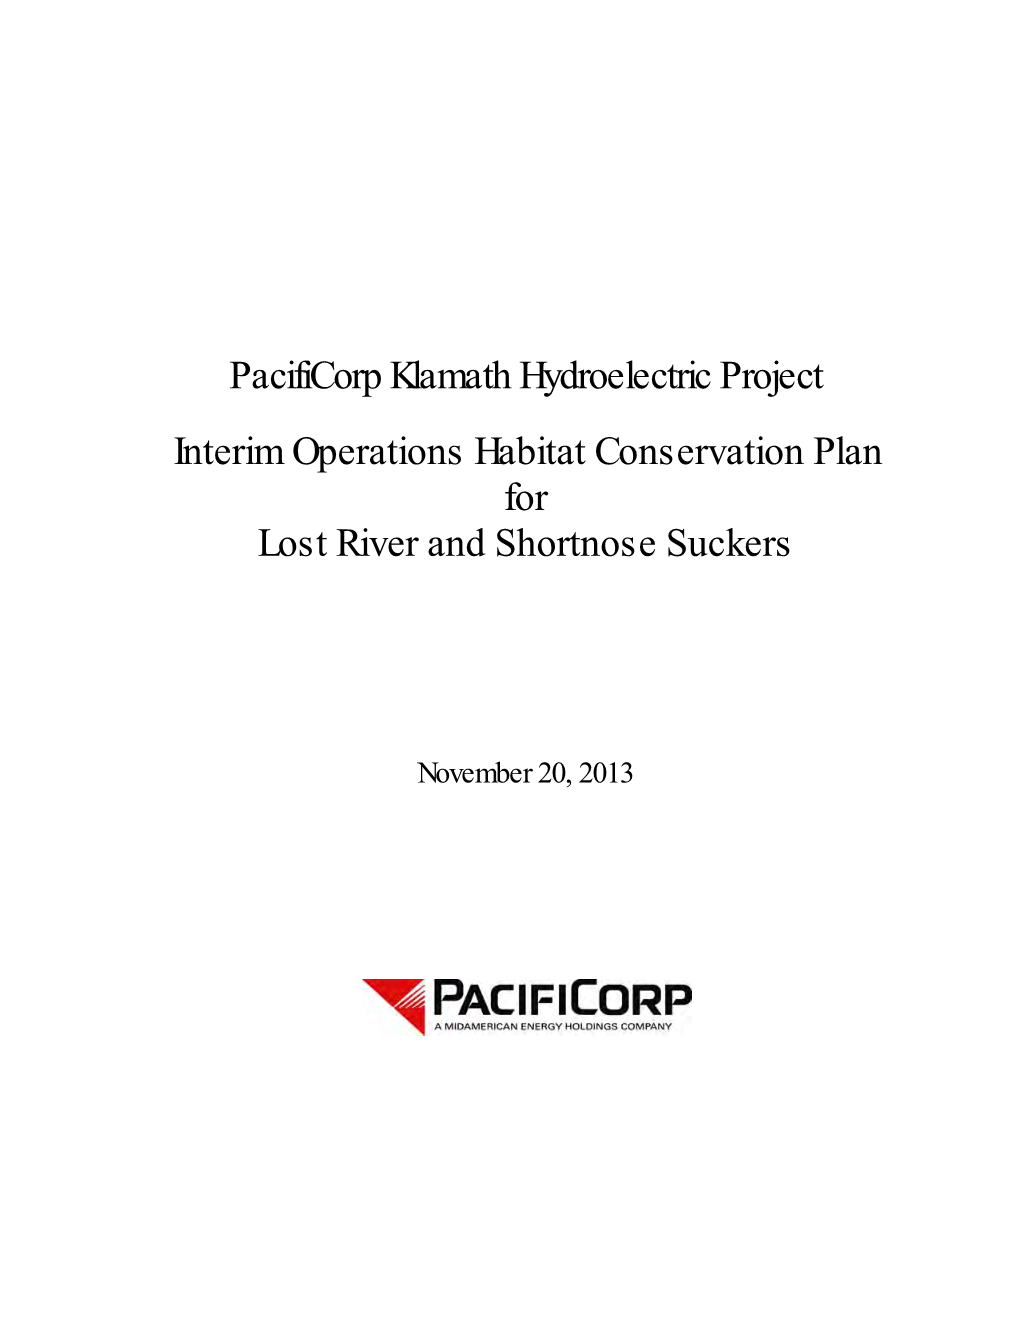 Pacificorp Klamath Hydroelectric Project Interim Operations Habitat Conservation Plan for Lost River and Shortnose Suckers